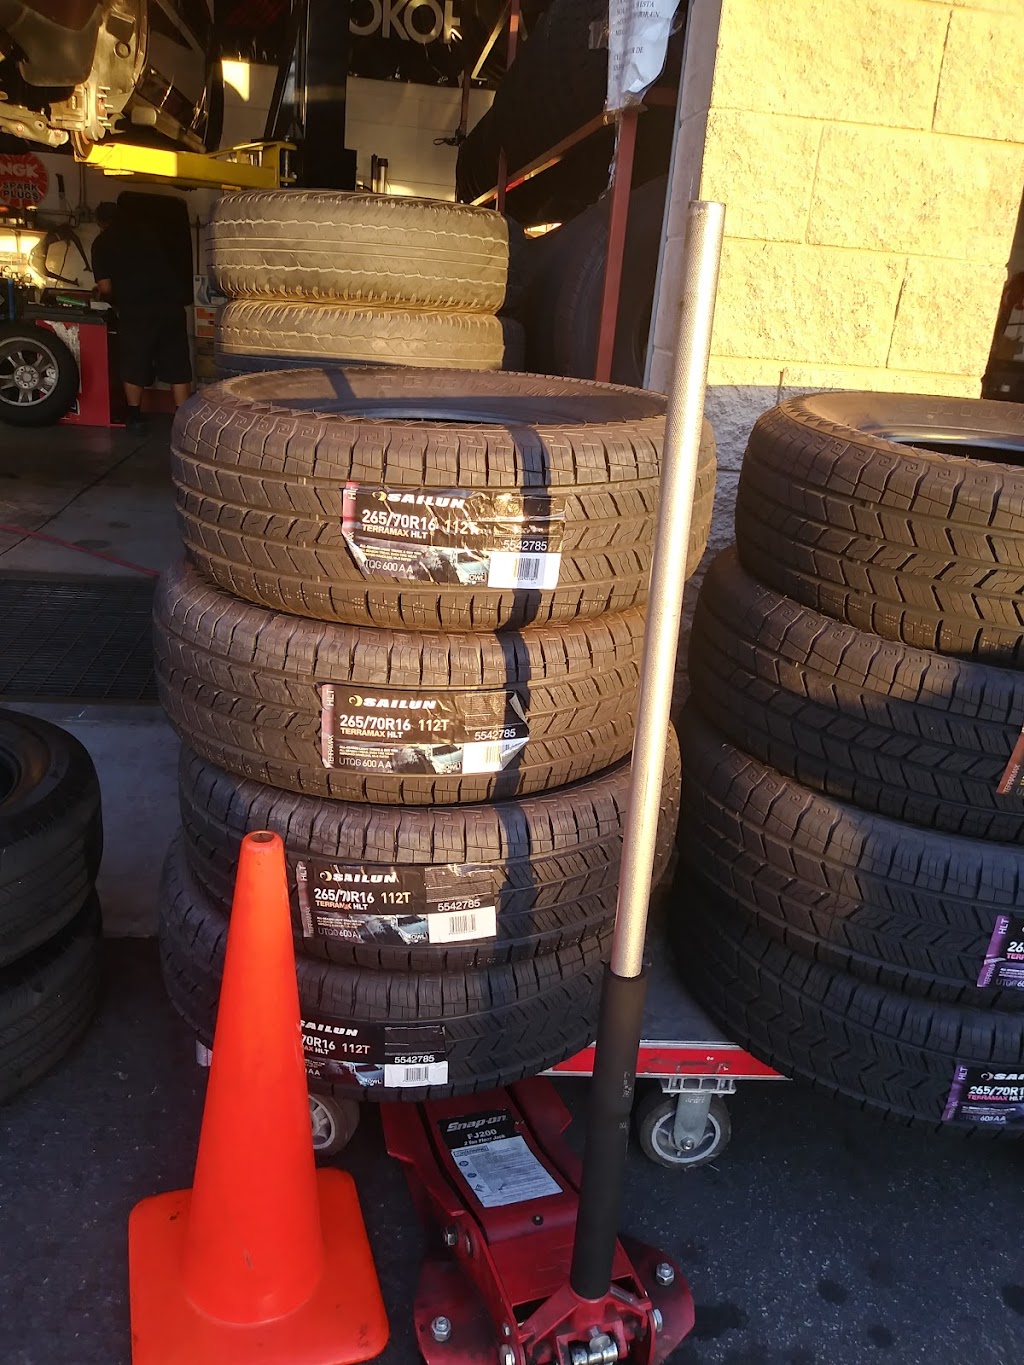 Front Line Tires | 10607 Imperial Hwy., Norwalk, CA 90650, USA | Phone: (562) 929-2900